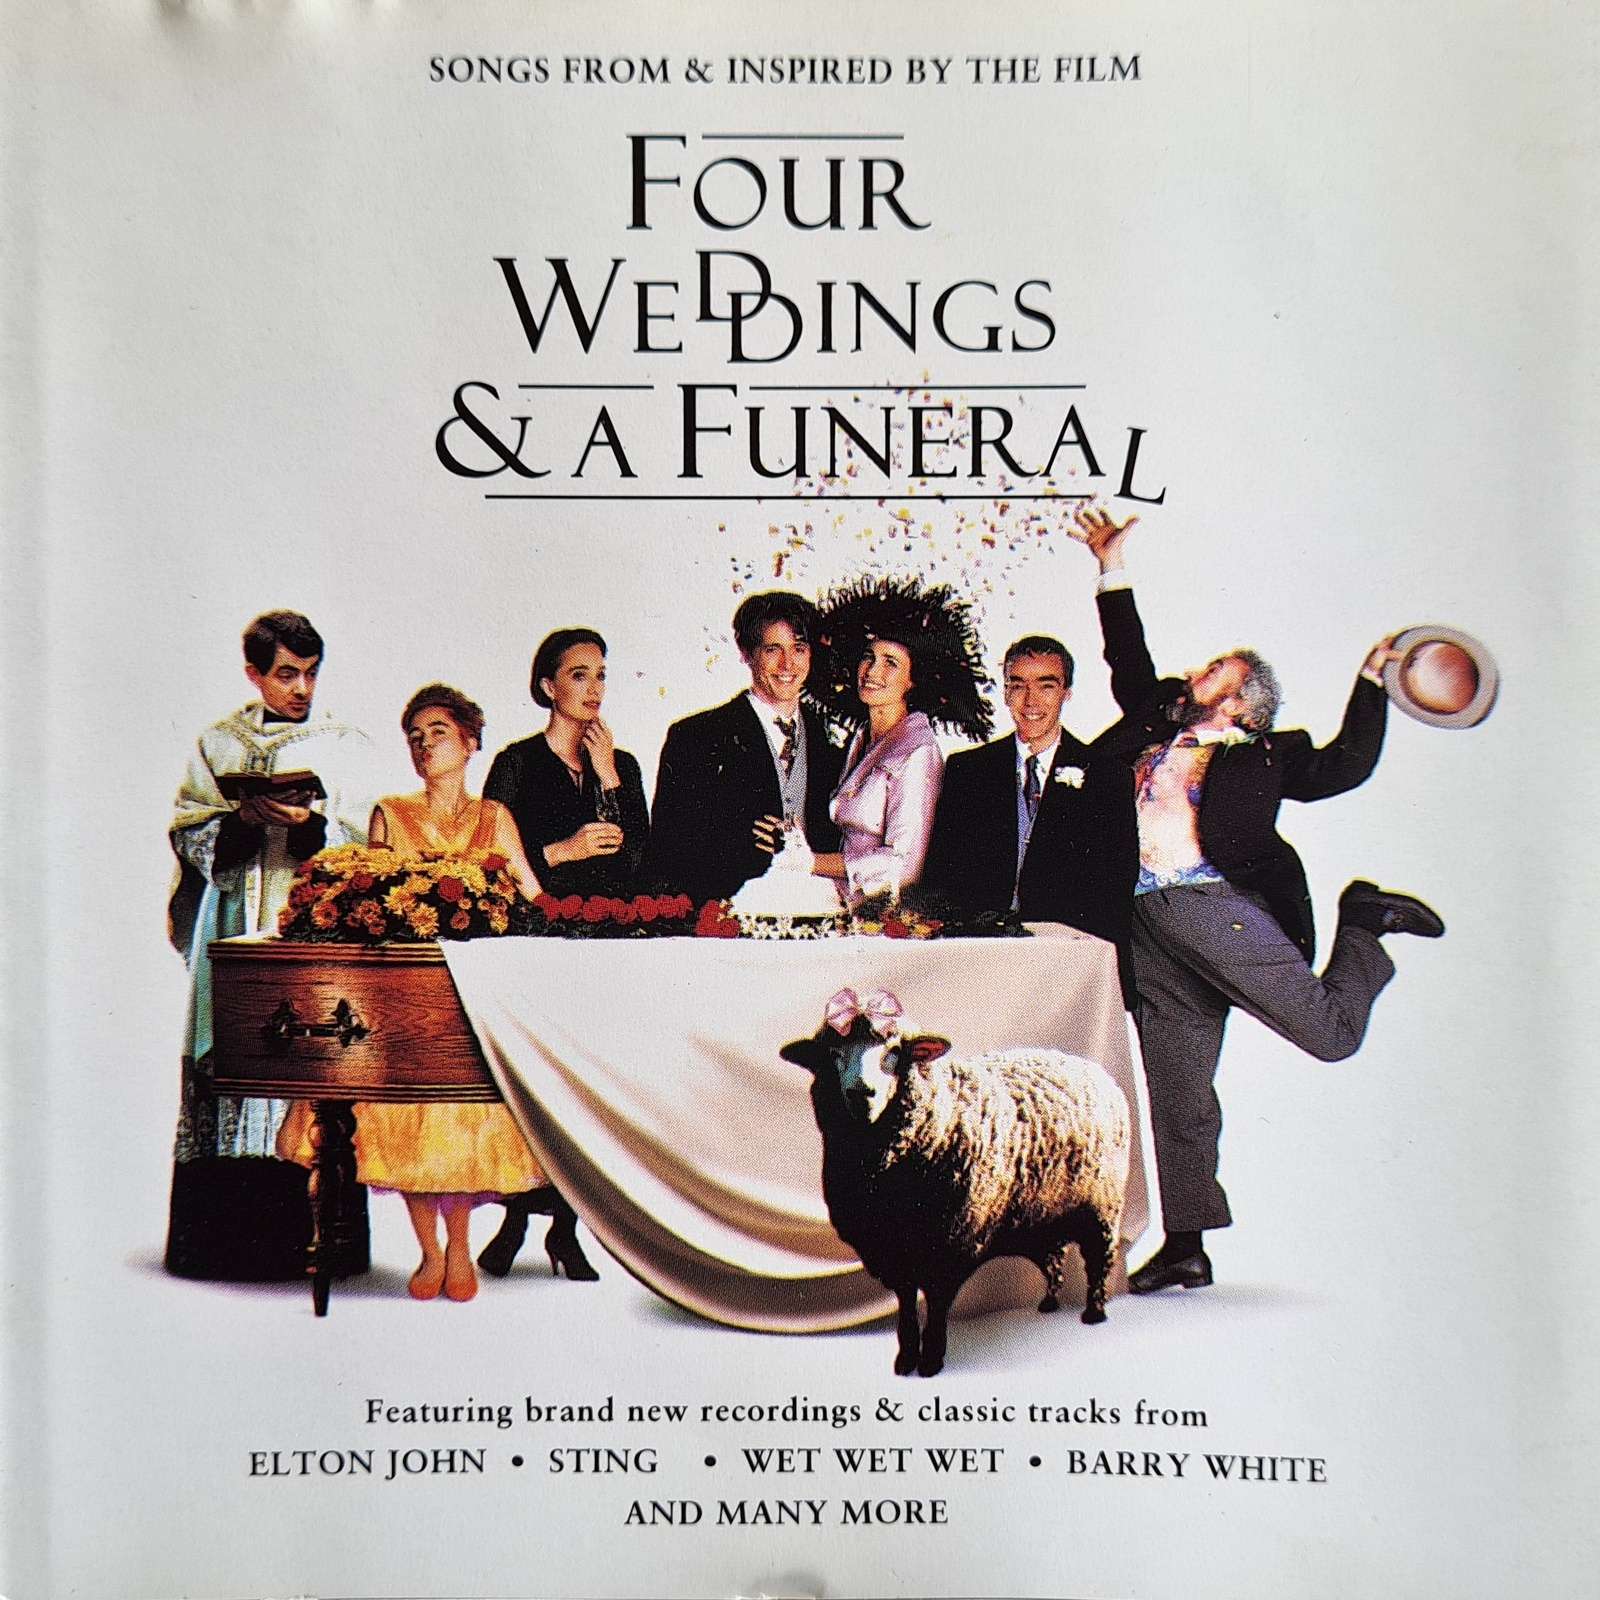 Four Weddings & a Funeral - Songs From & Inspired by the Film (CD)